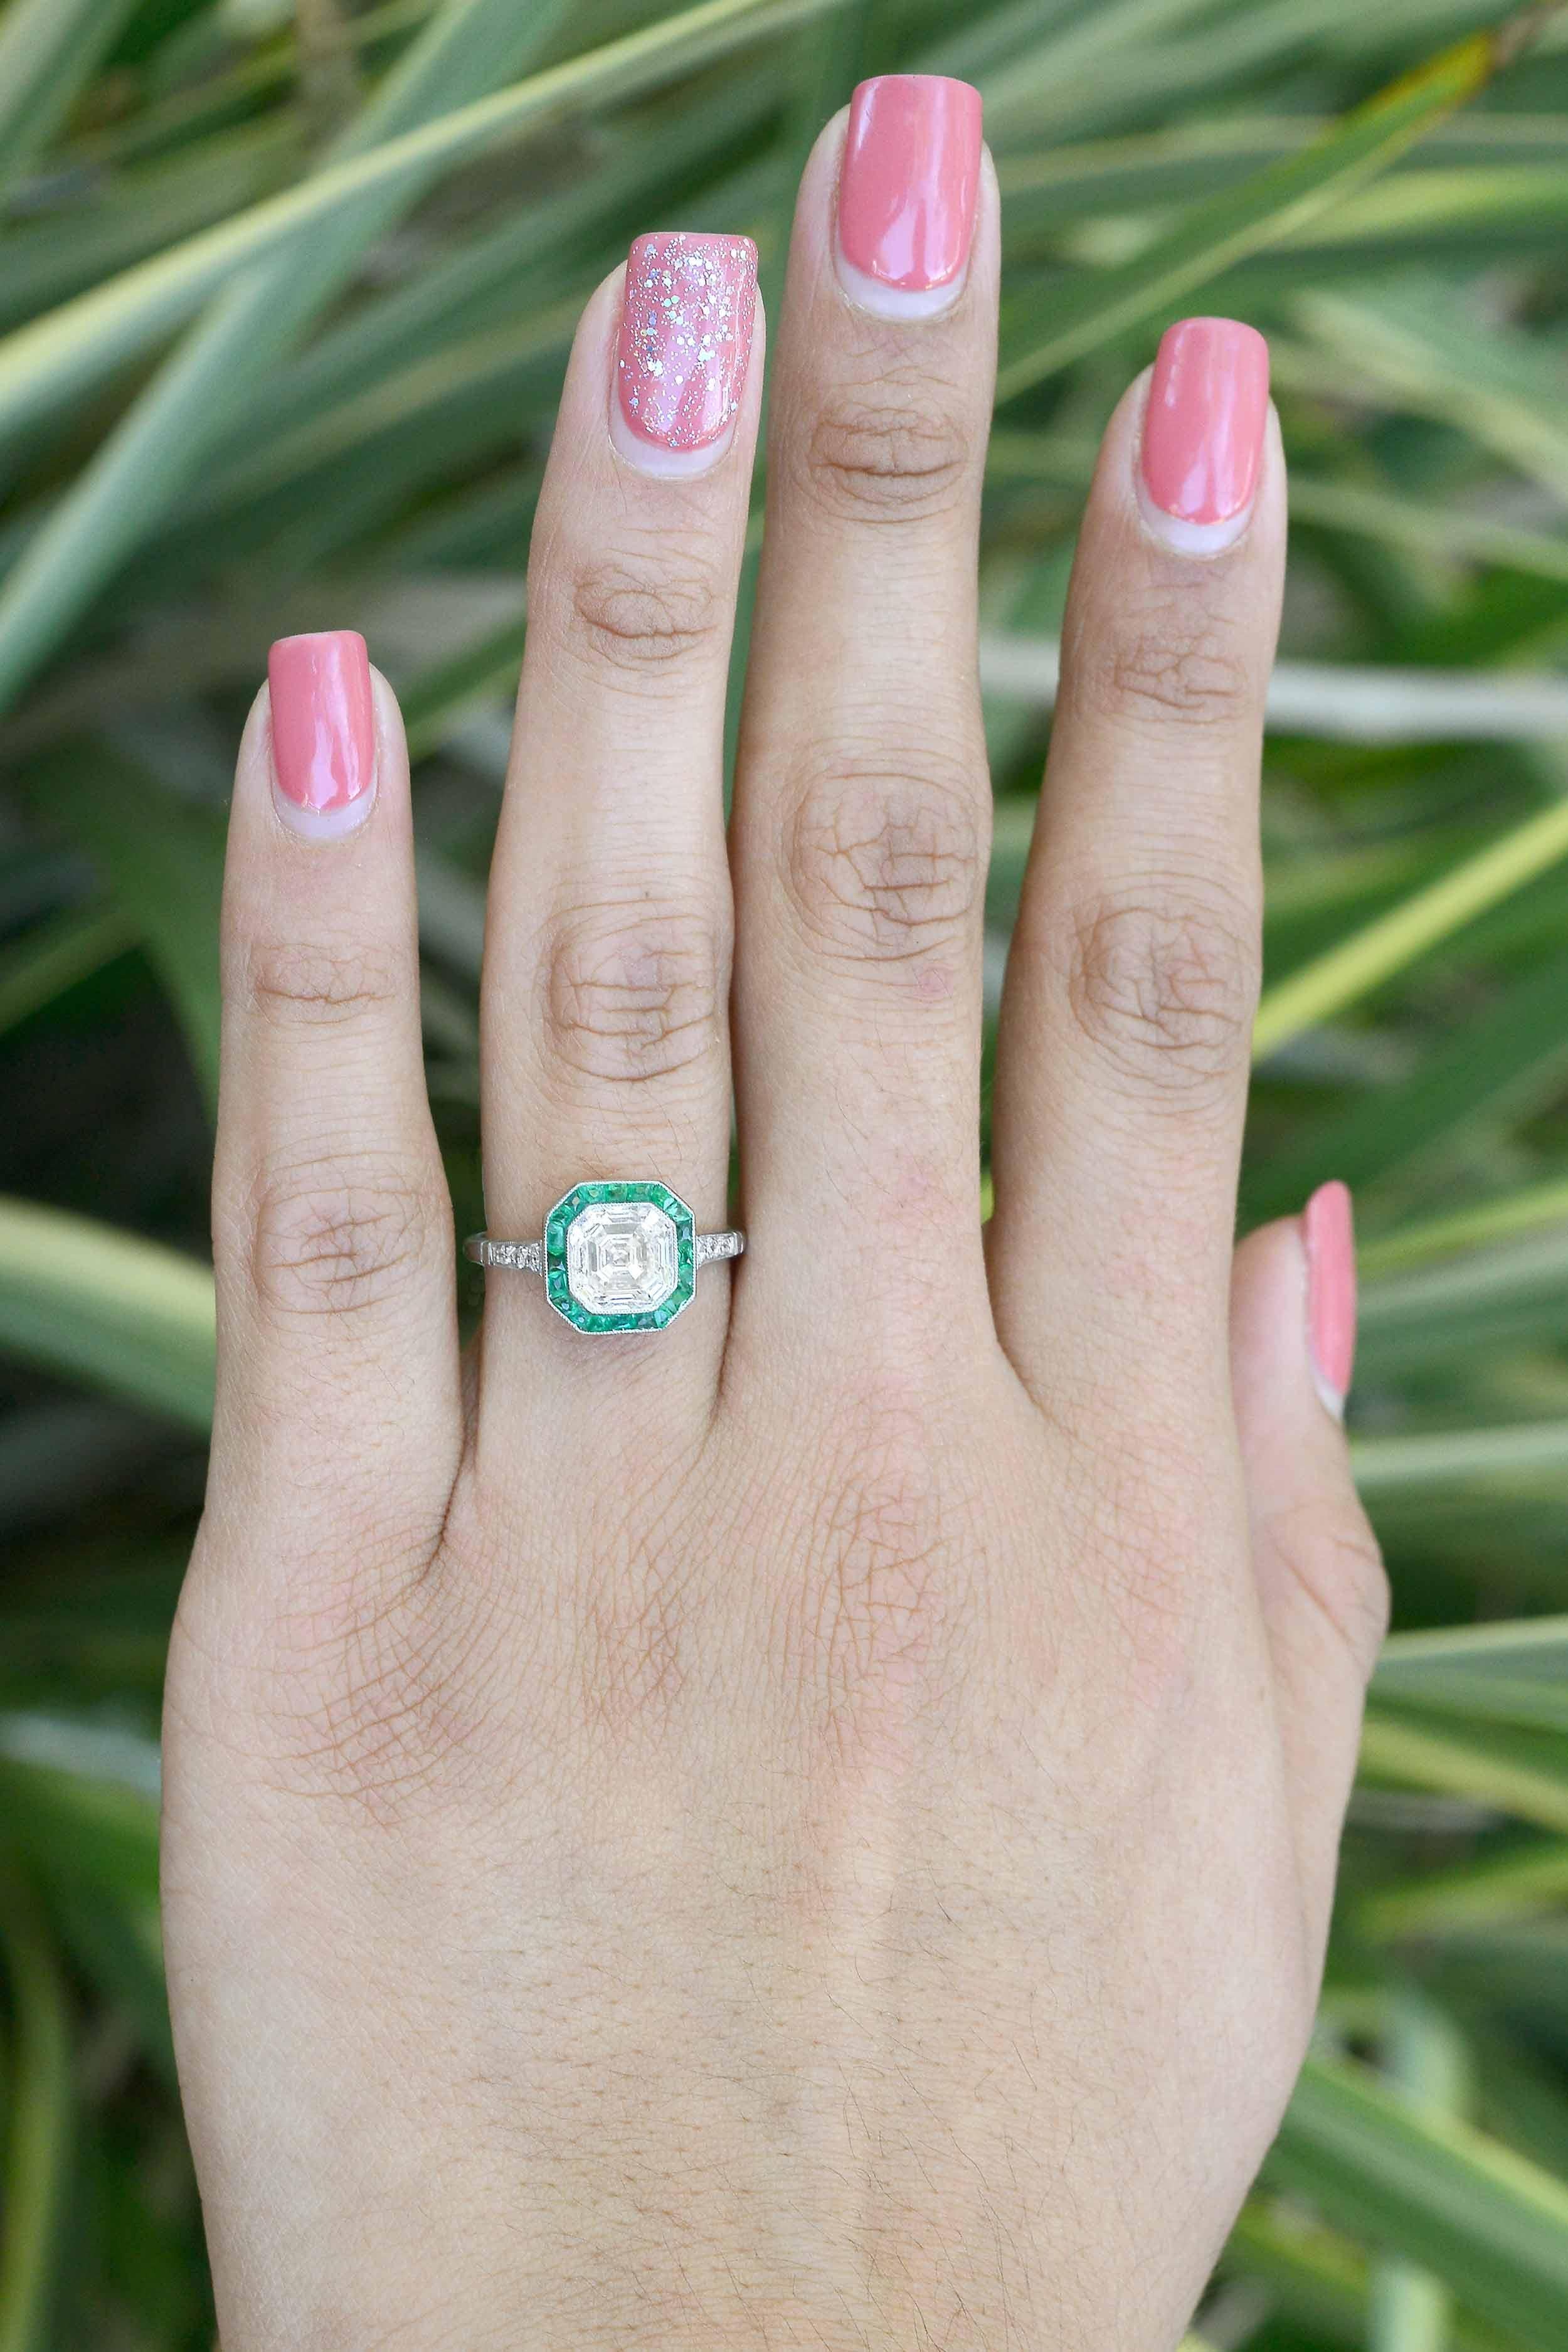 The Charlotte asscher cut diamond engagement ring is centered by a fiery 2 carat square sparkler. Set off by a French cut emerald halo and faithfully rendered by hand in an Art Deco style octagon platinum bezel.

You'll love the ease of wearing the